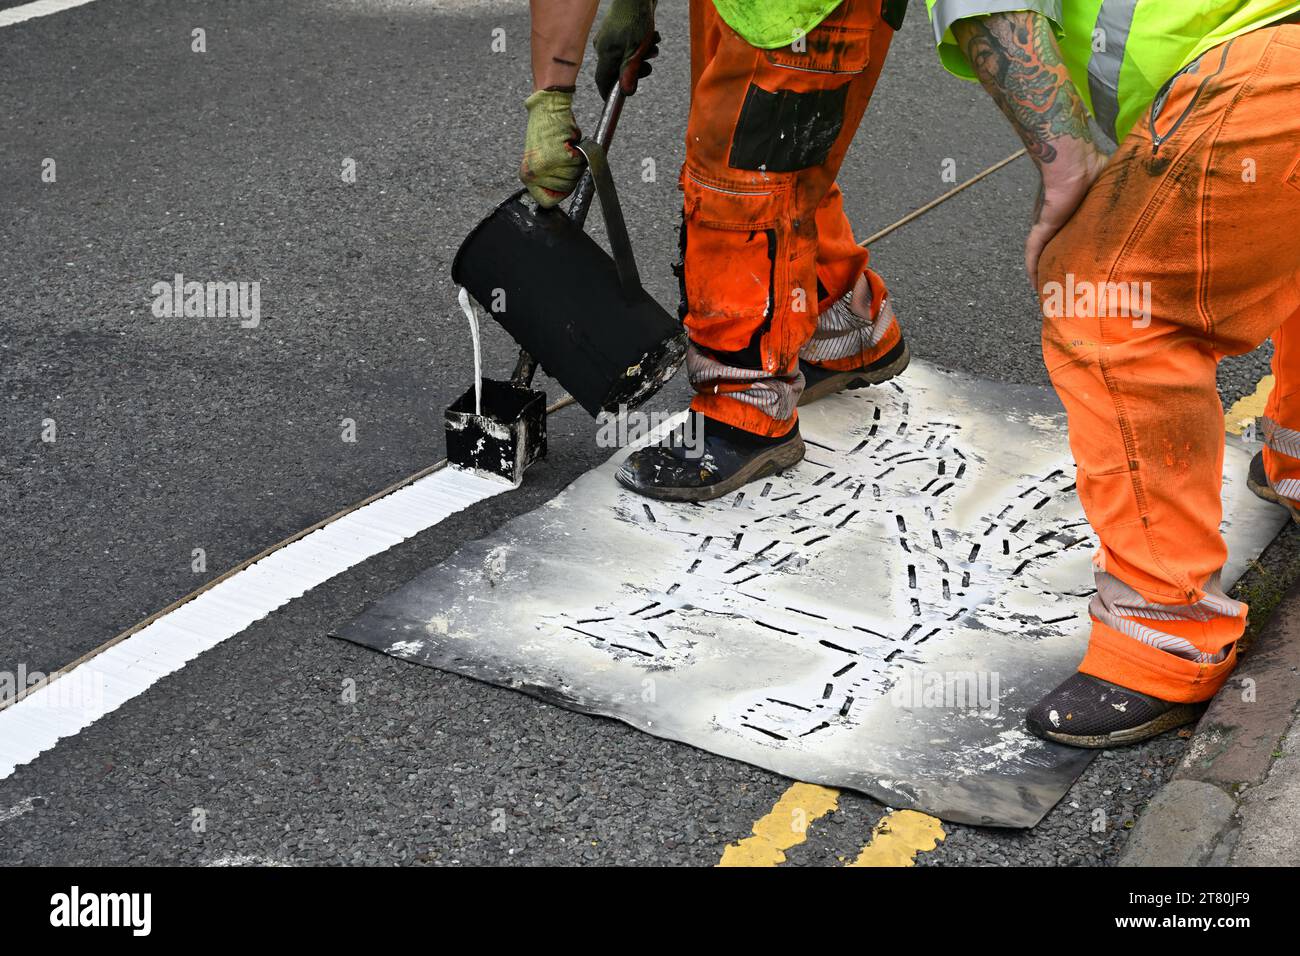 Workman painting white line with hot molten paint and laying stencil for cycle lane, Bristol, UK Stock Photo